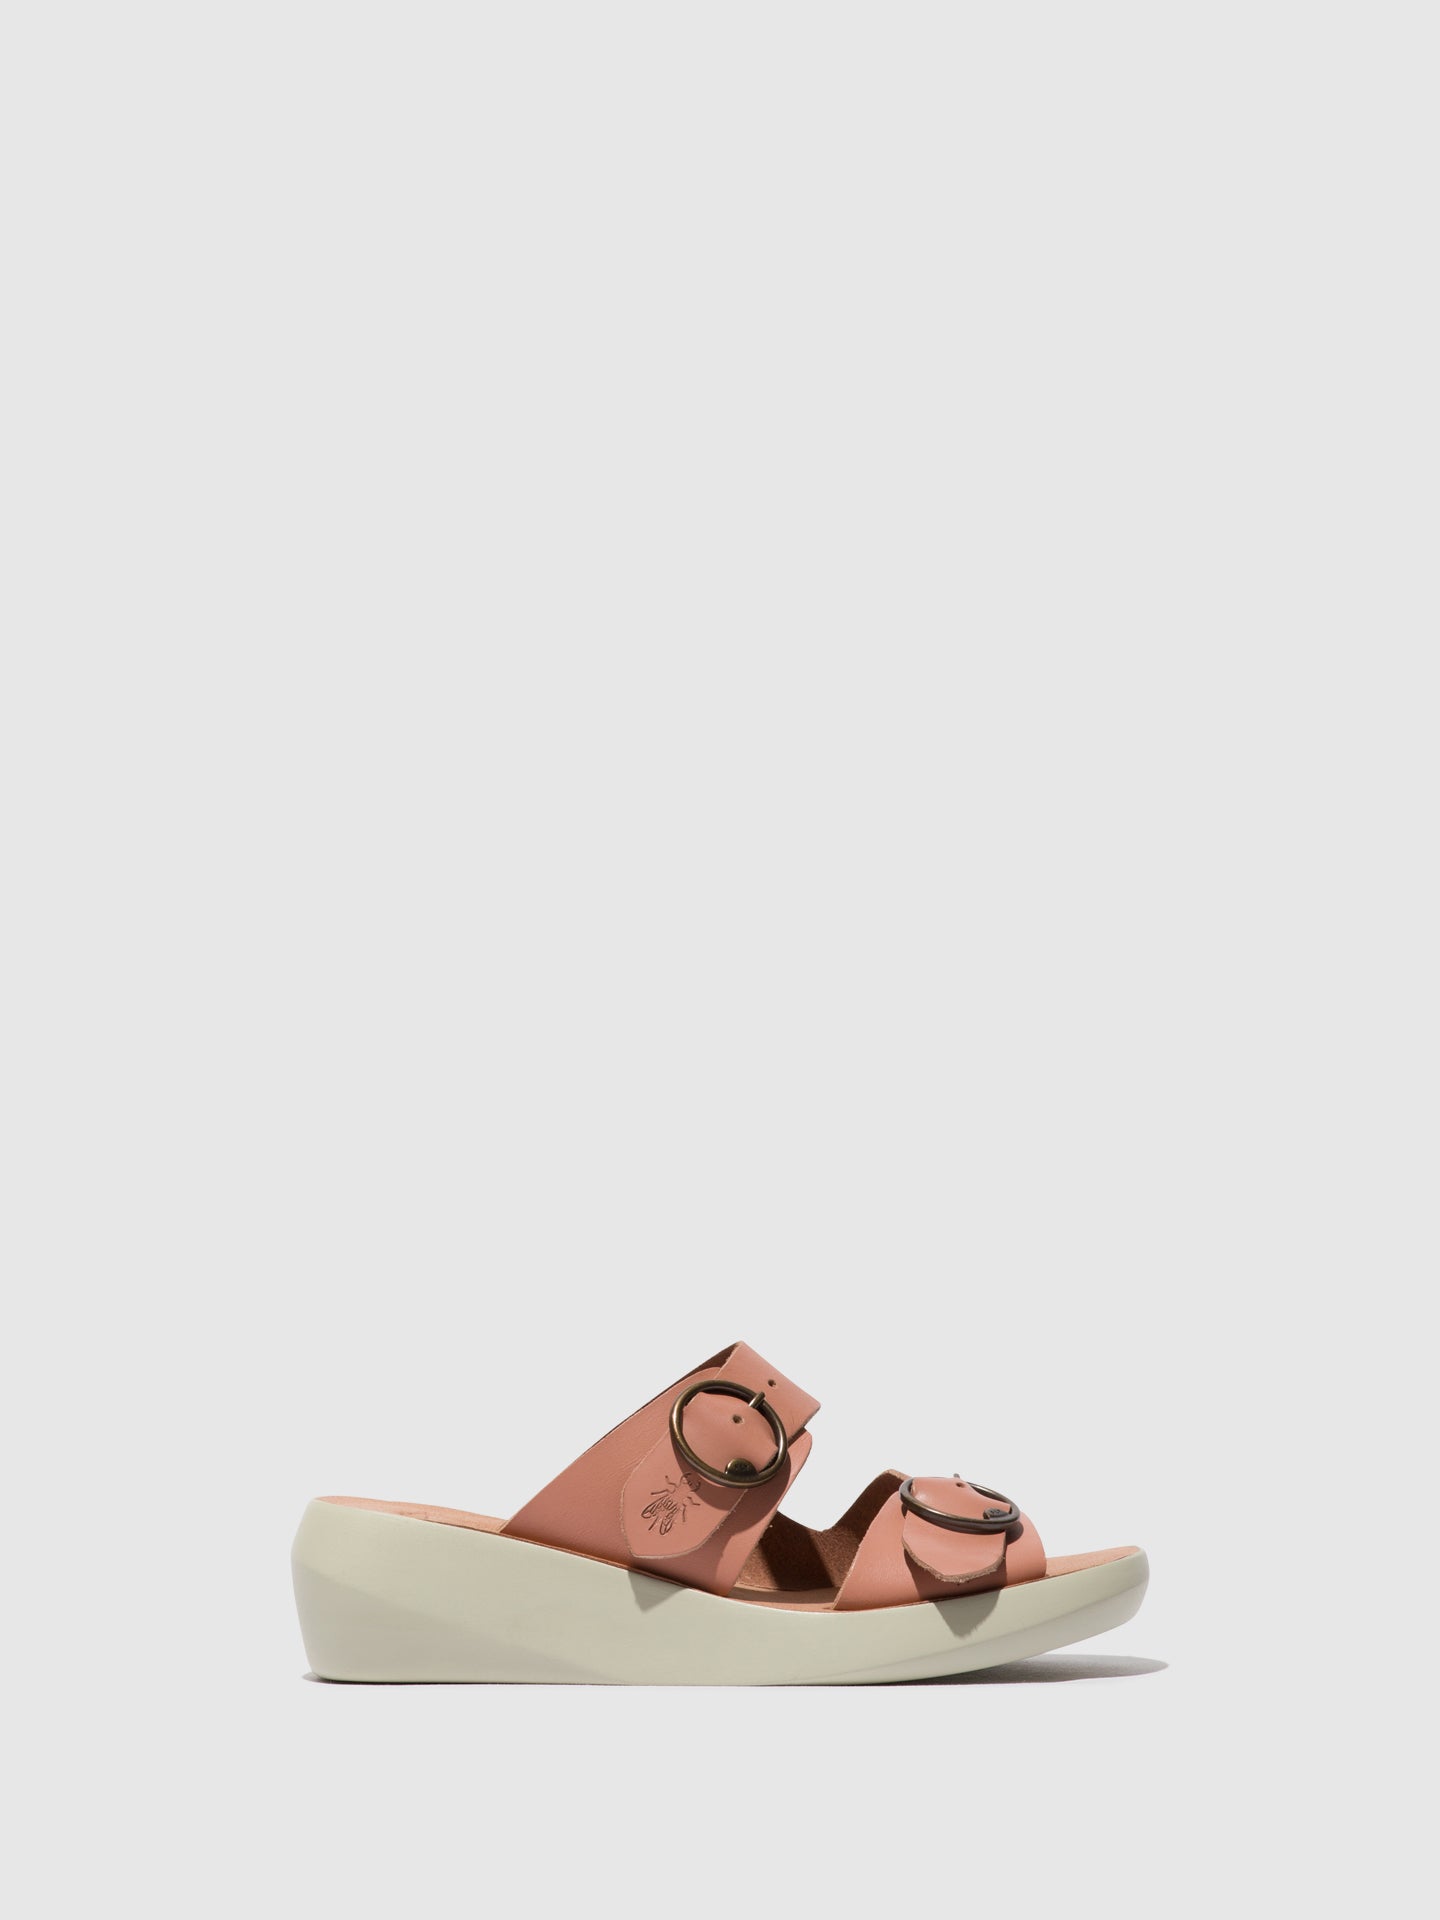 Fly London Buckle Sandals BALD849FLY ROSE